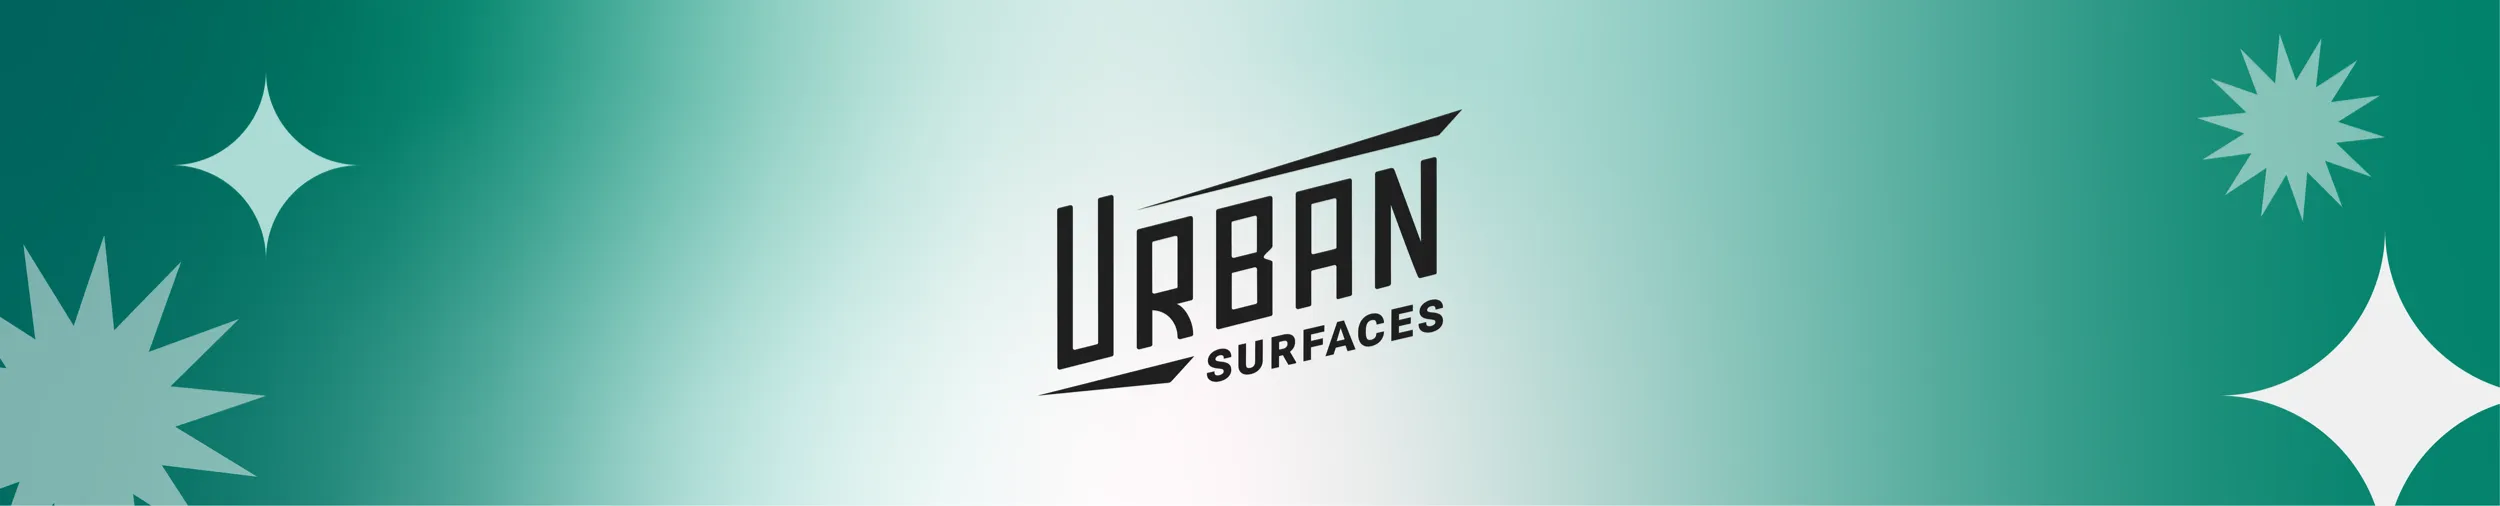 Urban Surfaces logo on teal background with artistic stars.